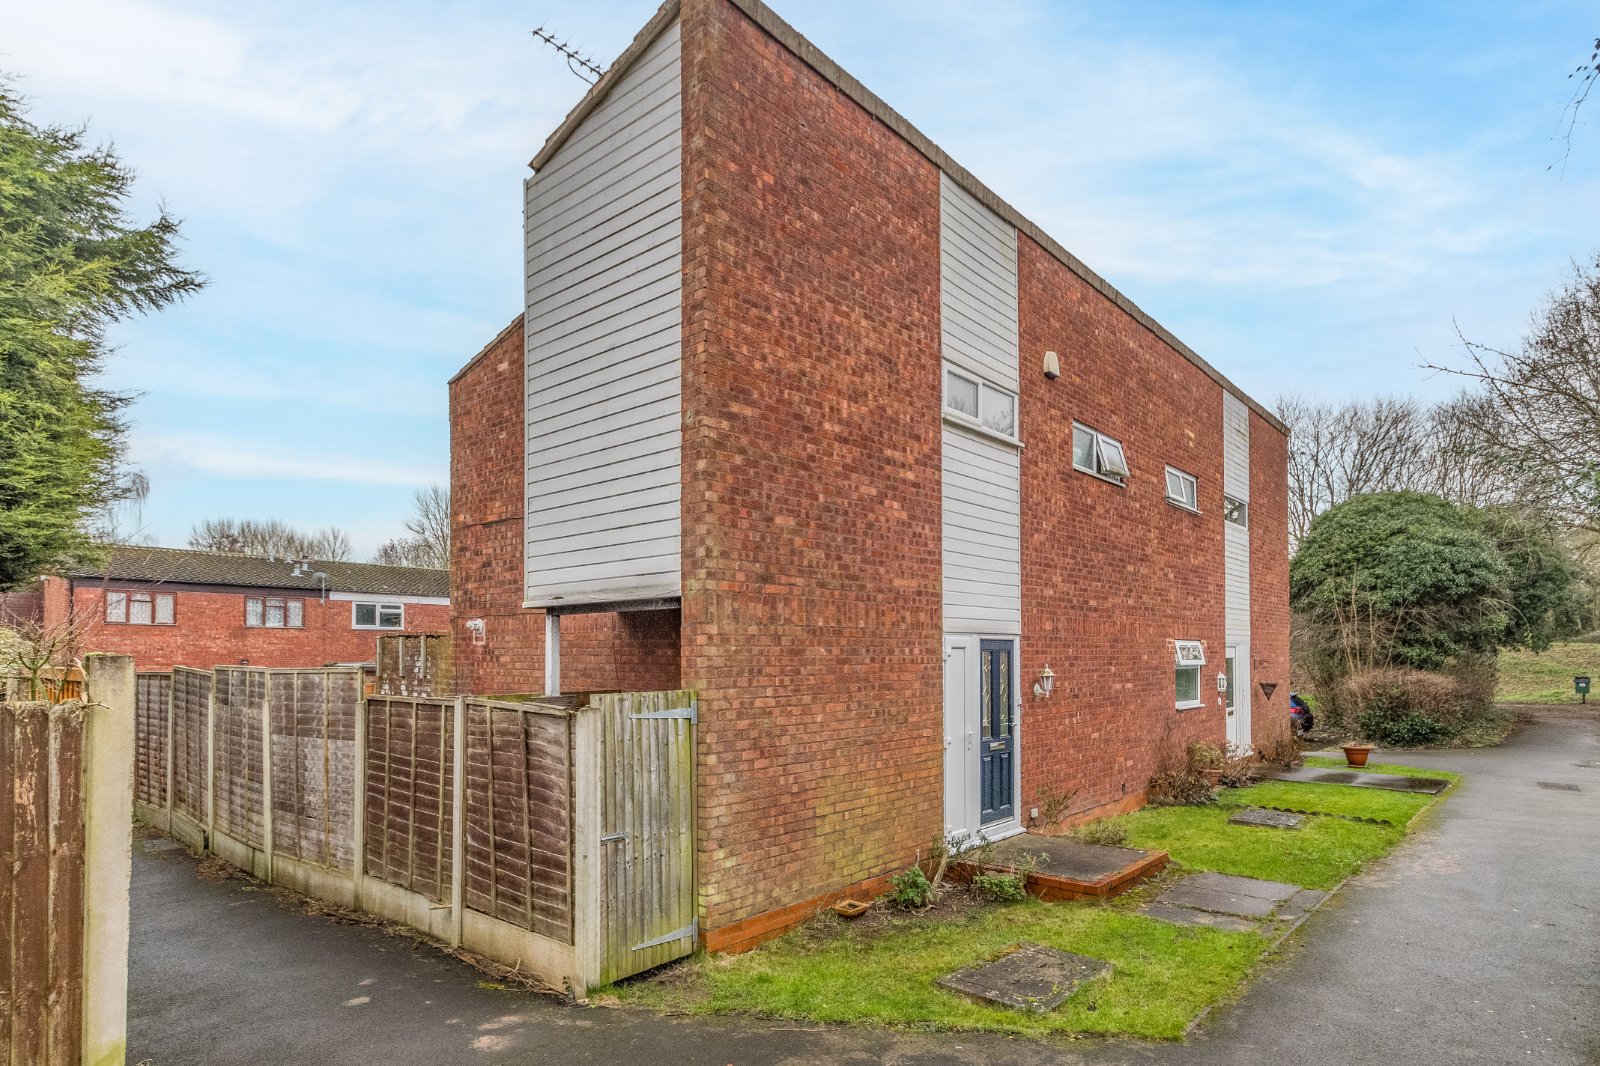 3 bed house for sale in Sutton Close, Winyates West - Property Image 1